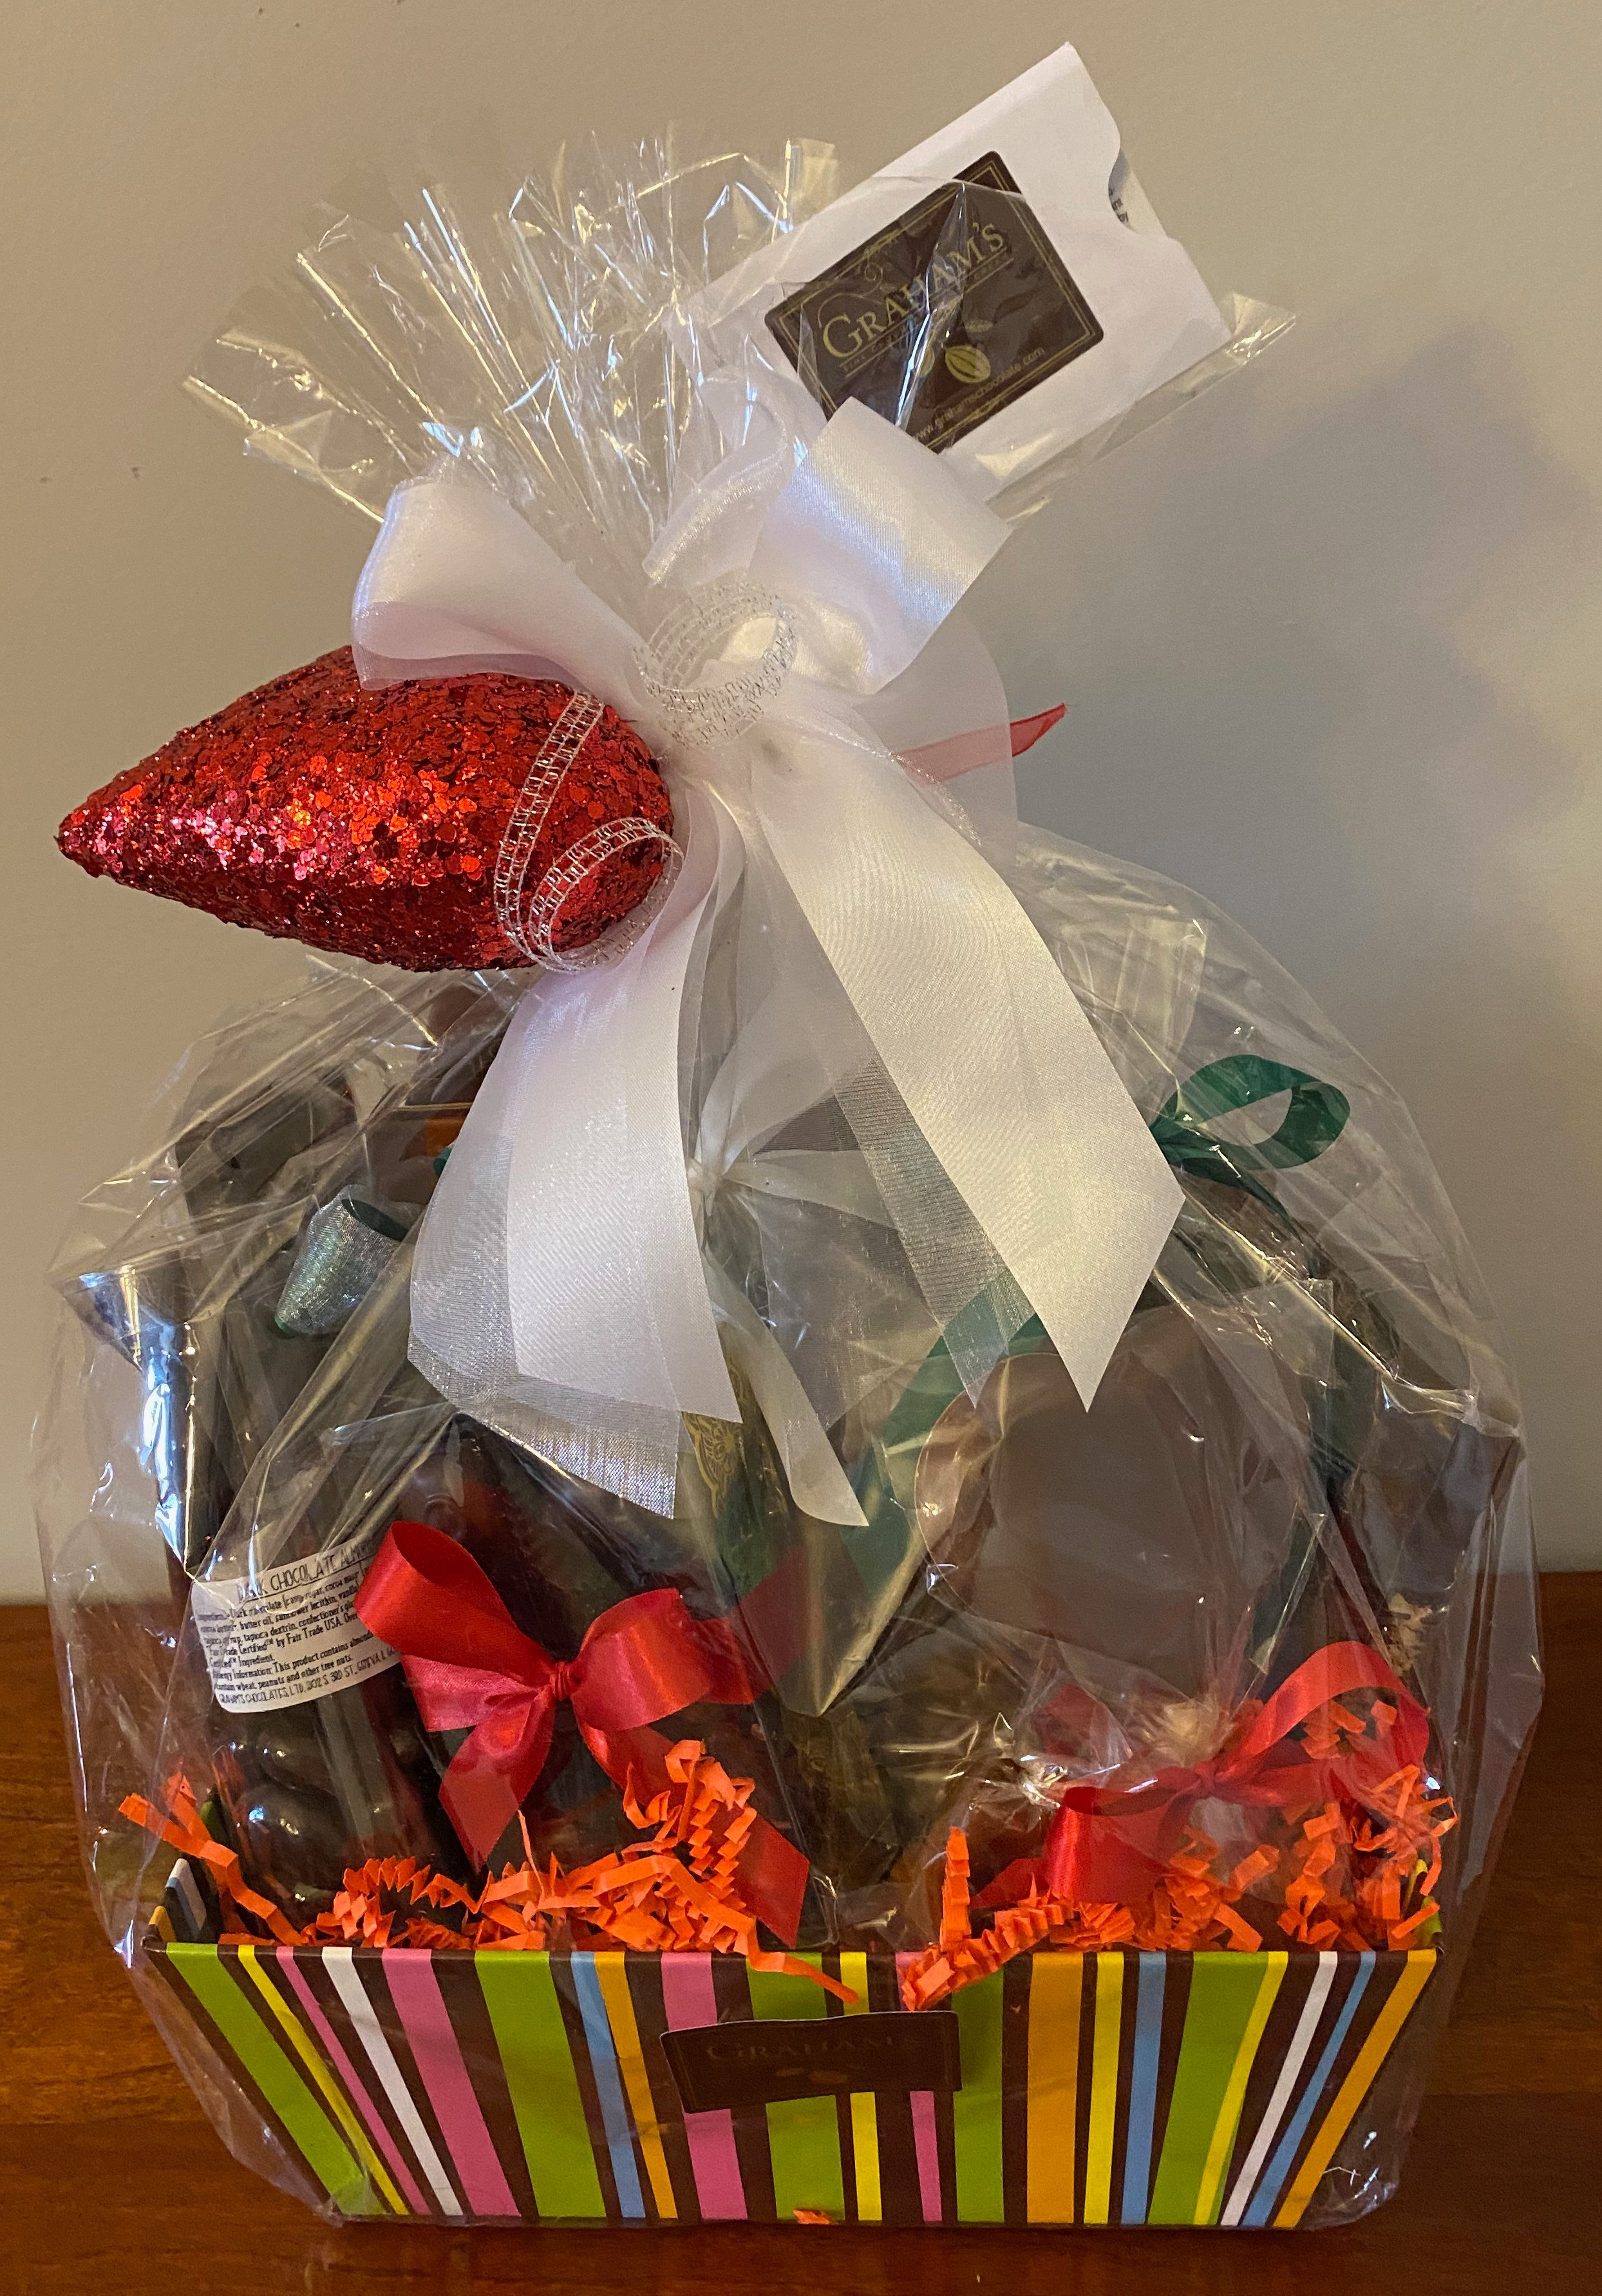 Enjoy a variety of the best chocolate in the Fox Valley - Graham's Chocolates! Also includes a $20 gift card for Graham's.